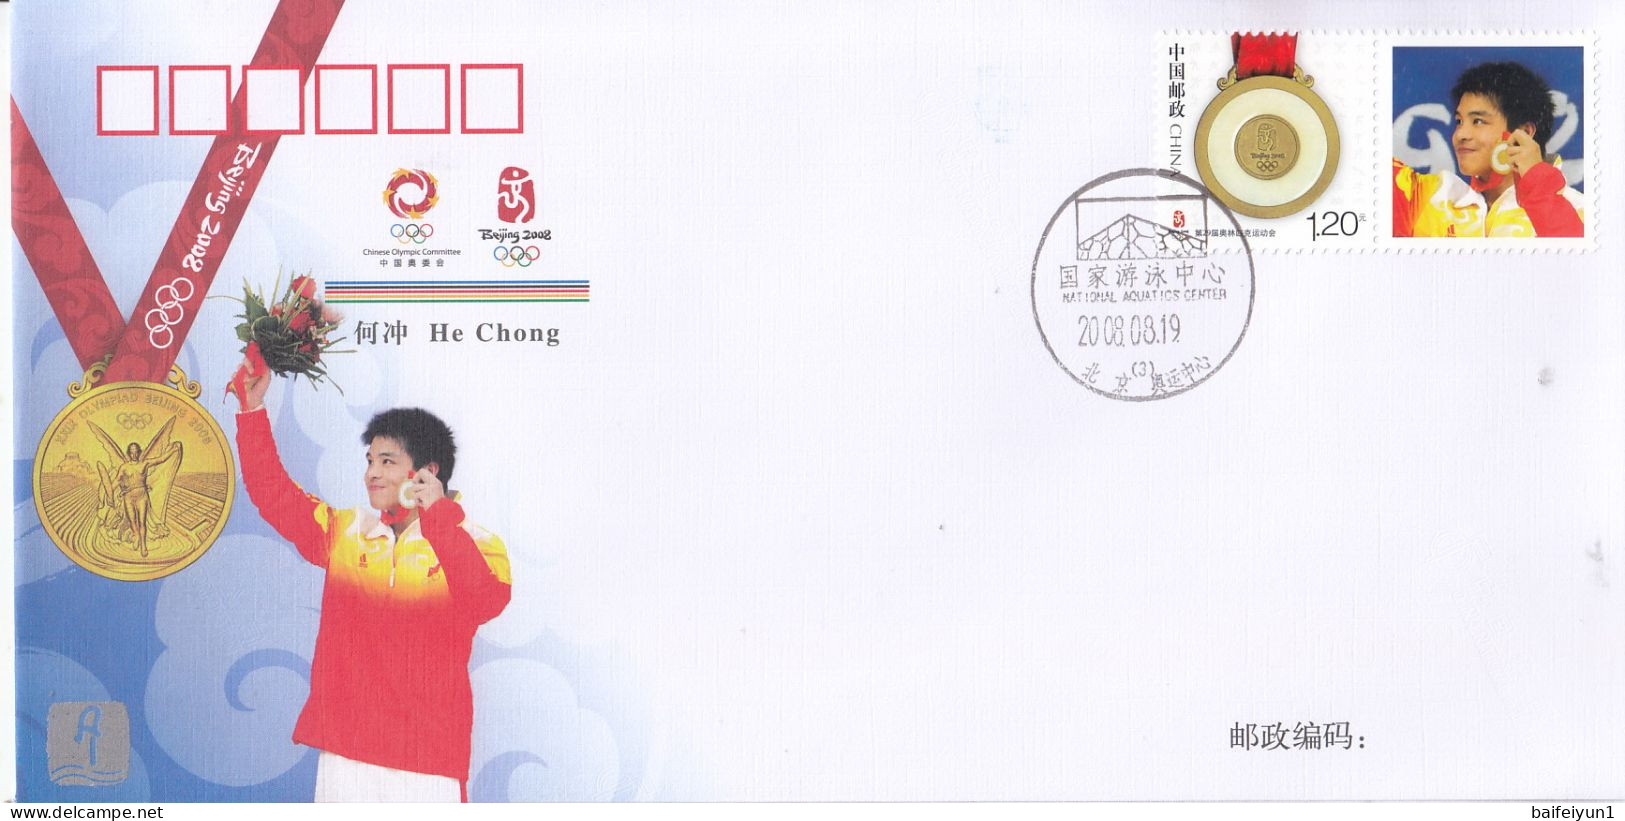 CHINA 2008 GPJF-1.51 Victory In Men's 3m Springboard In The Game Of The XXIX Olympiad Cover - Diving